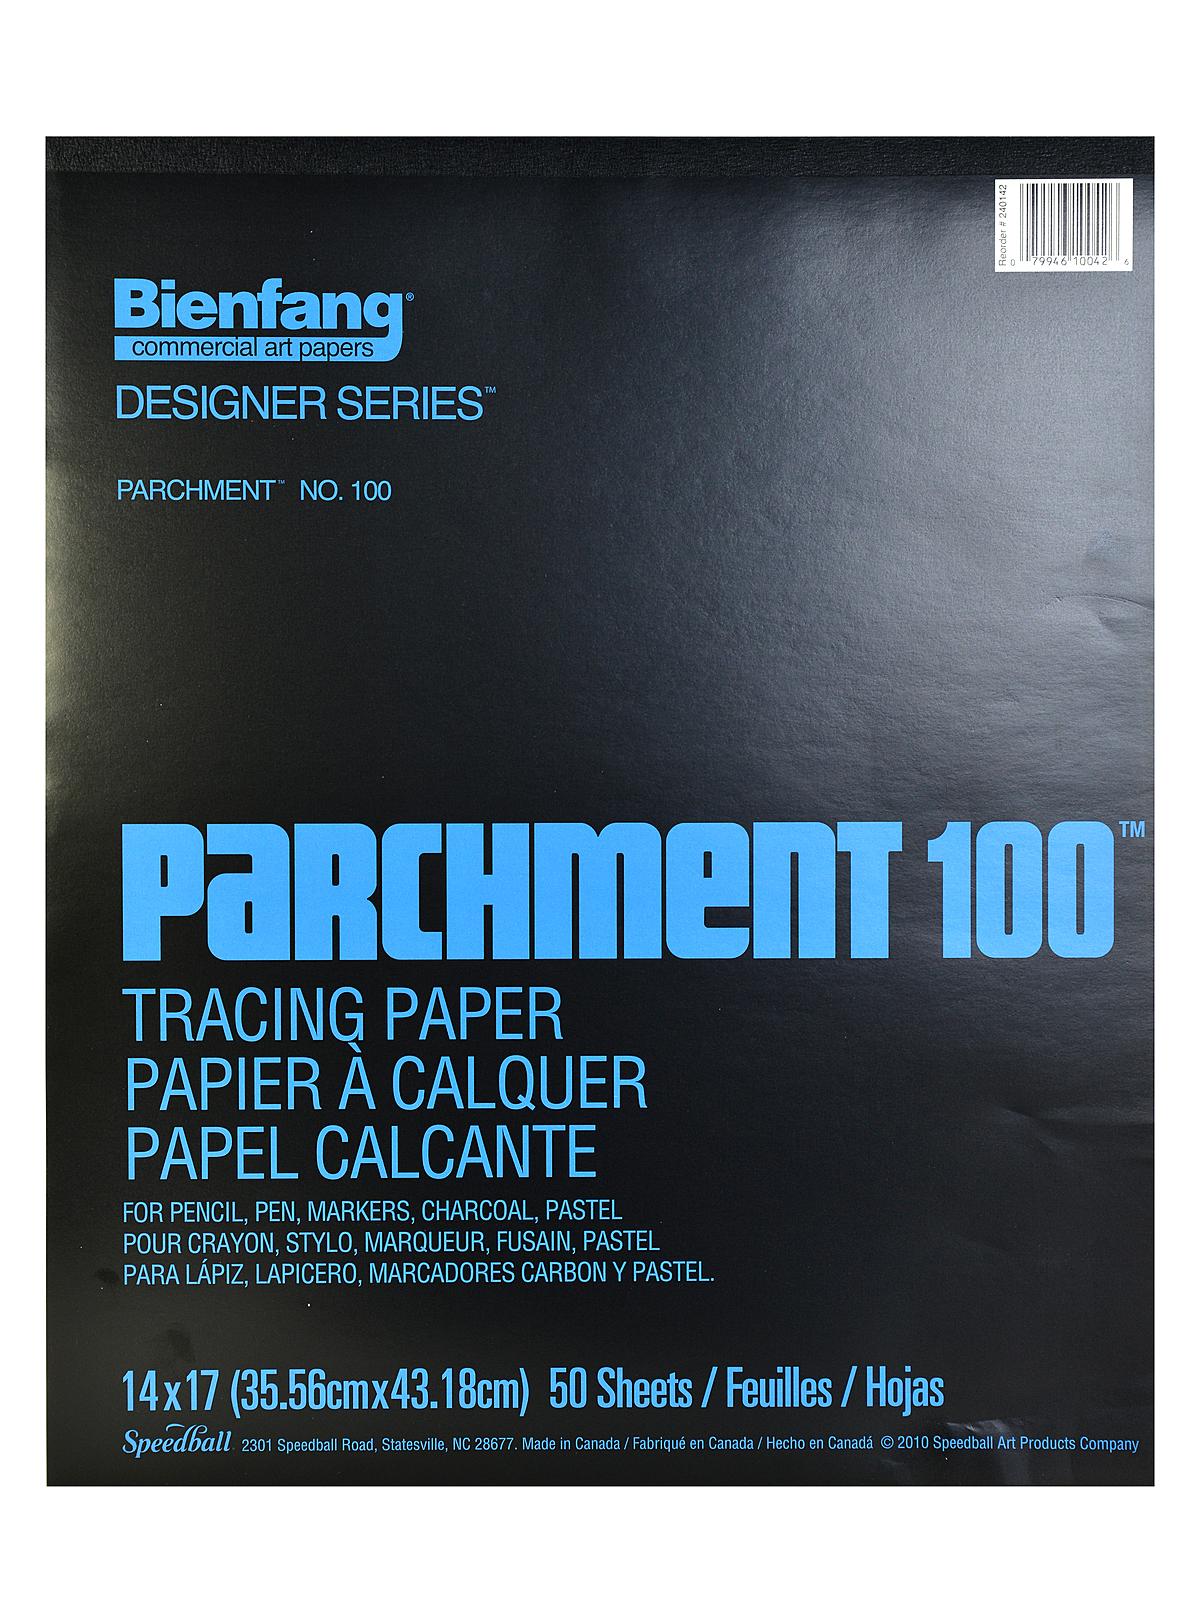 Parchment 100 Tracing Paper 14 In. X 17 In. Pad Of 50 Sheets